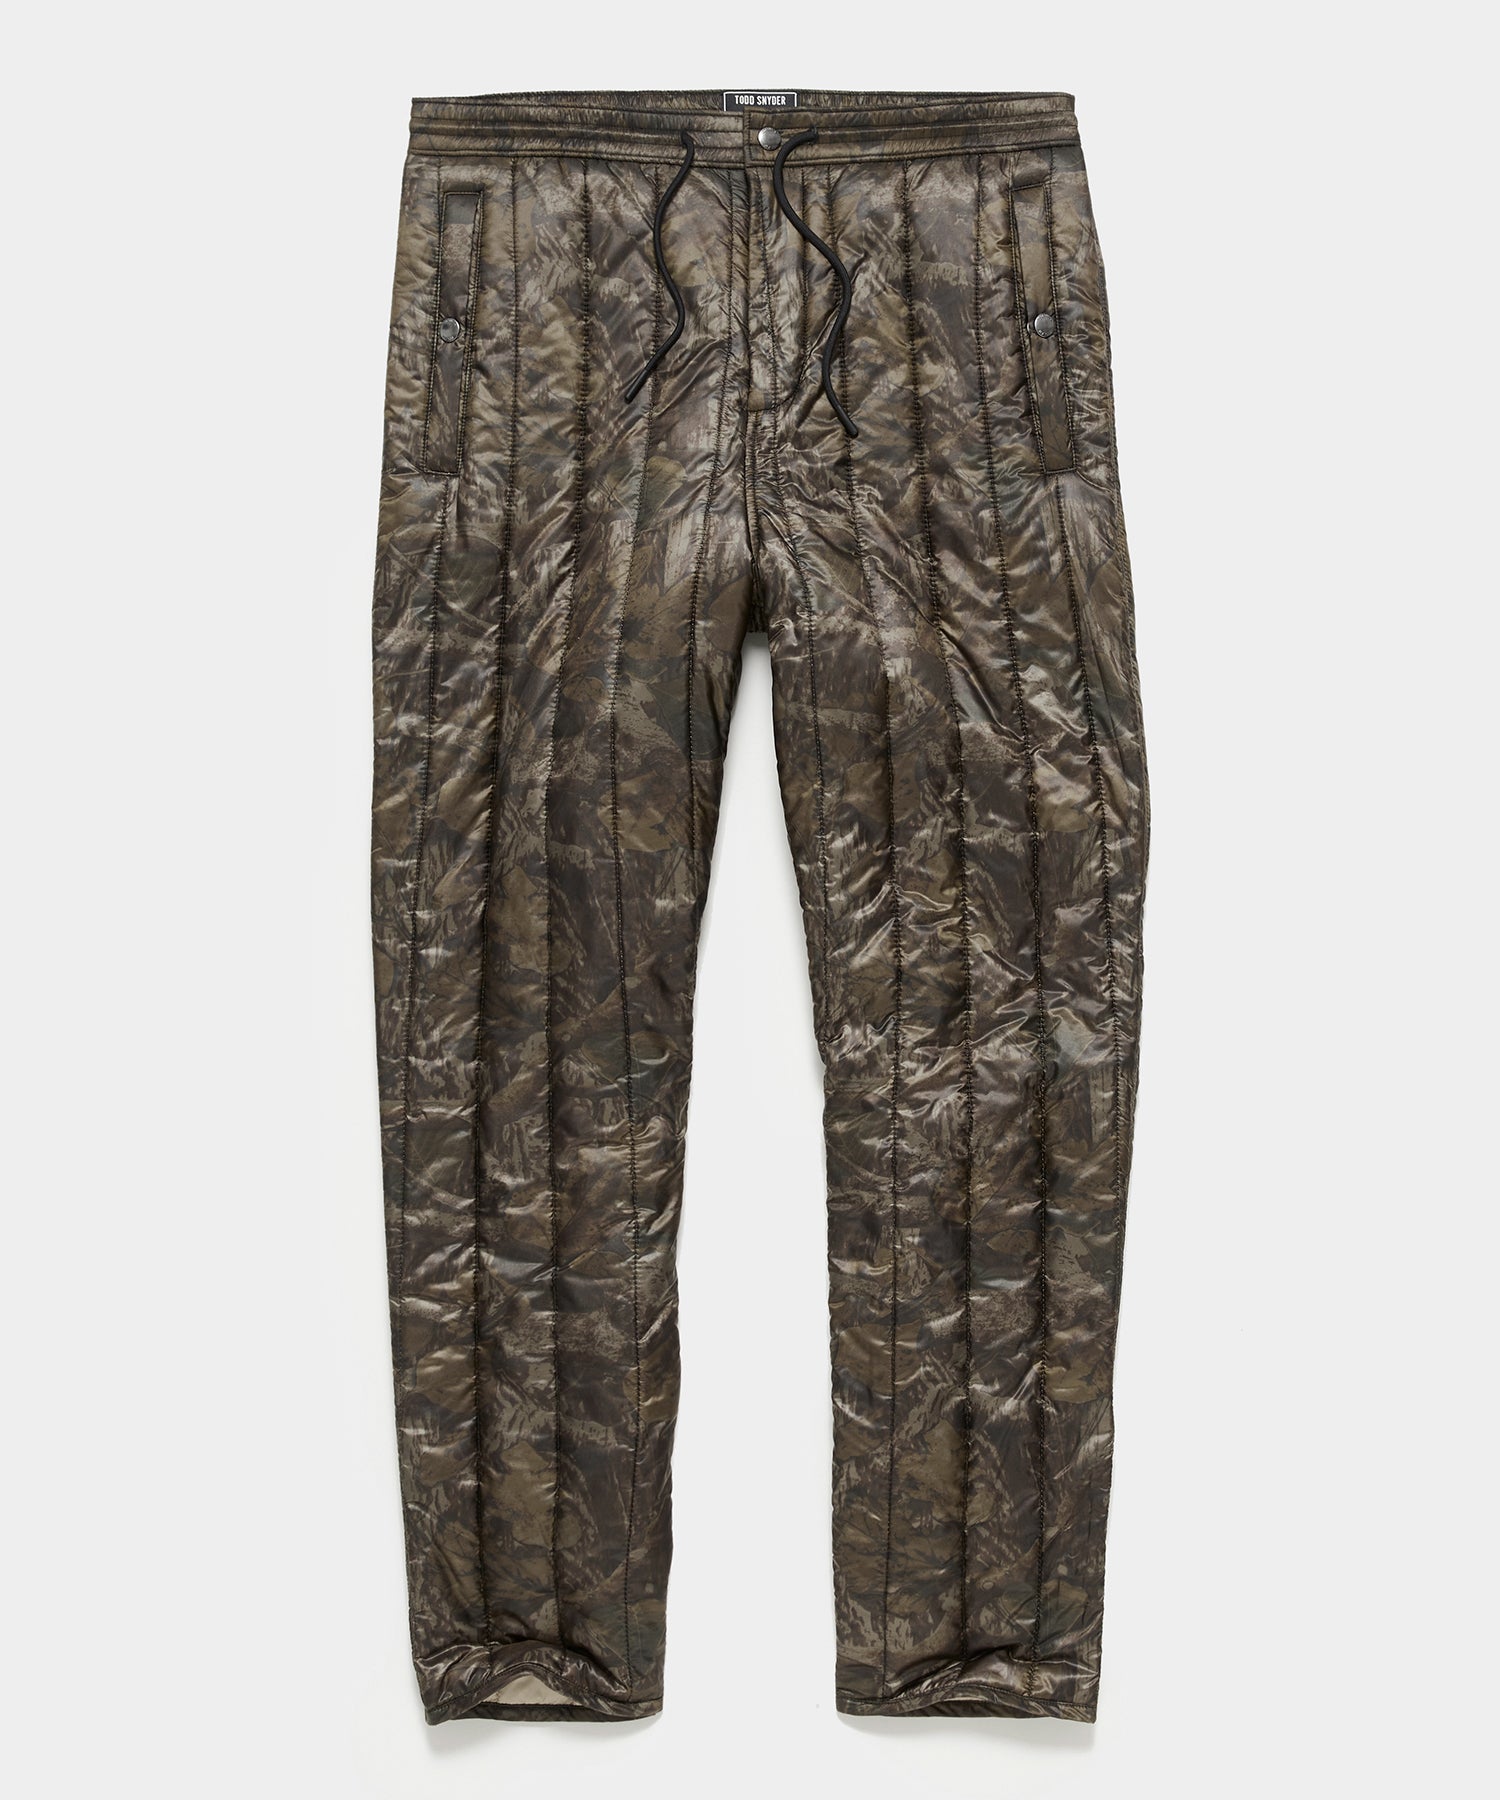 Japanese Quilted Liner Pant in Camo